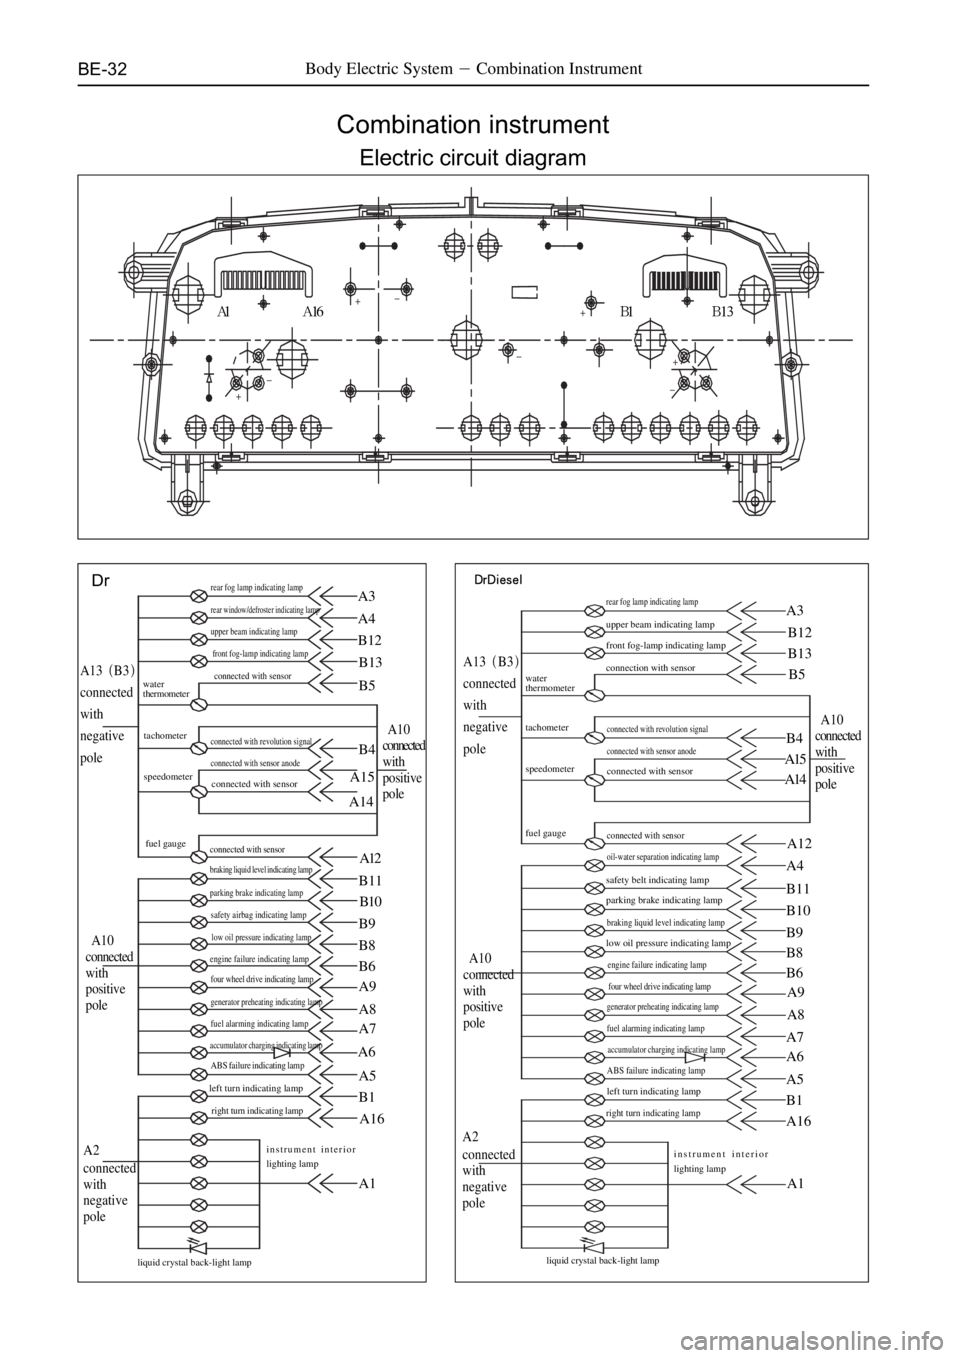 GREAT WALL SO COOL 2006  Service Manual BE-32Body Electric SystemCombination Instrument
Combination instrument
Electric circuit diagram
�
� �� �
�
�
�
^N ^NS _N _ N P
DraêaáÉëÉärear fog lamp indicating lamp
rear window/defros